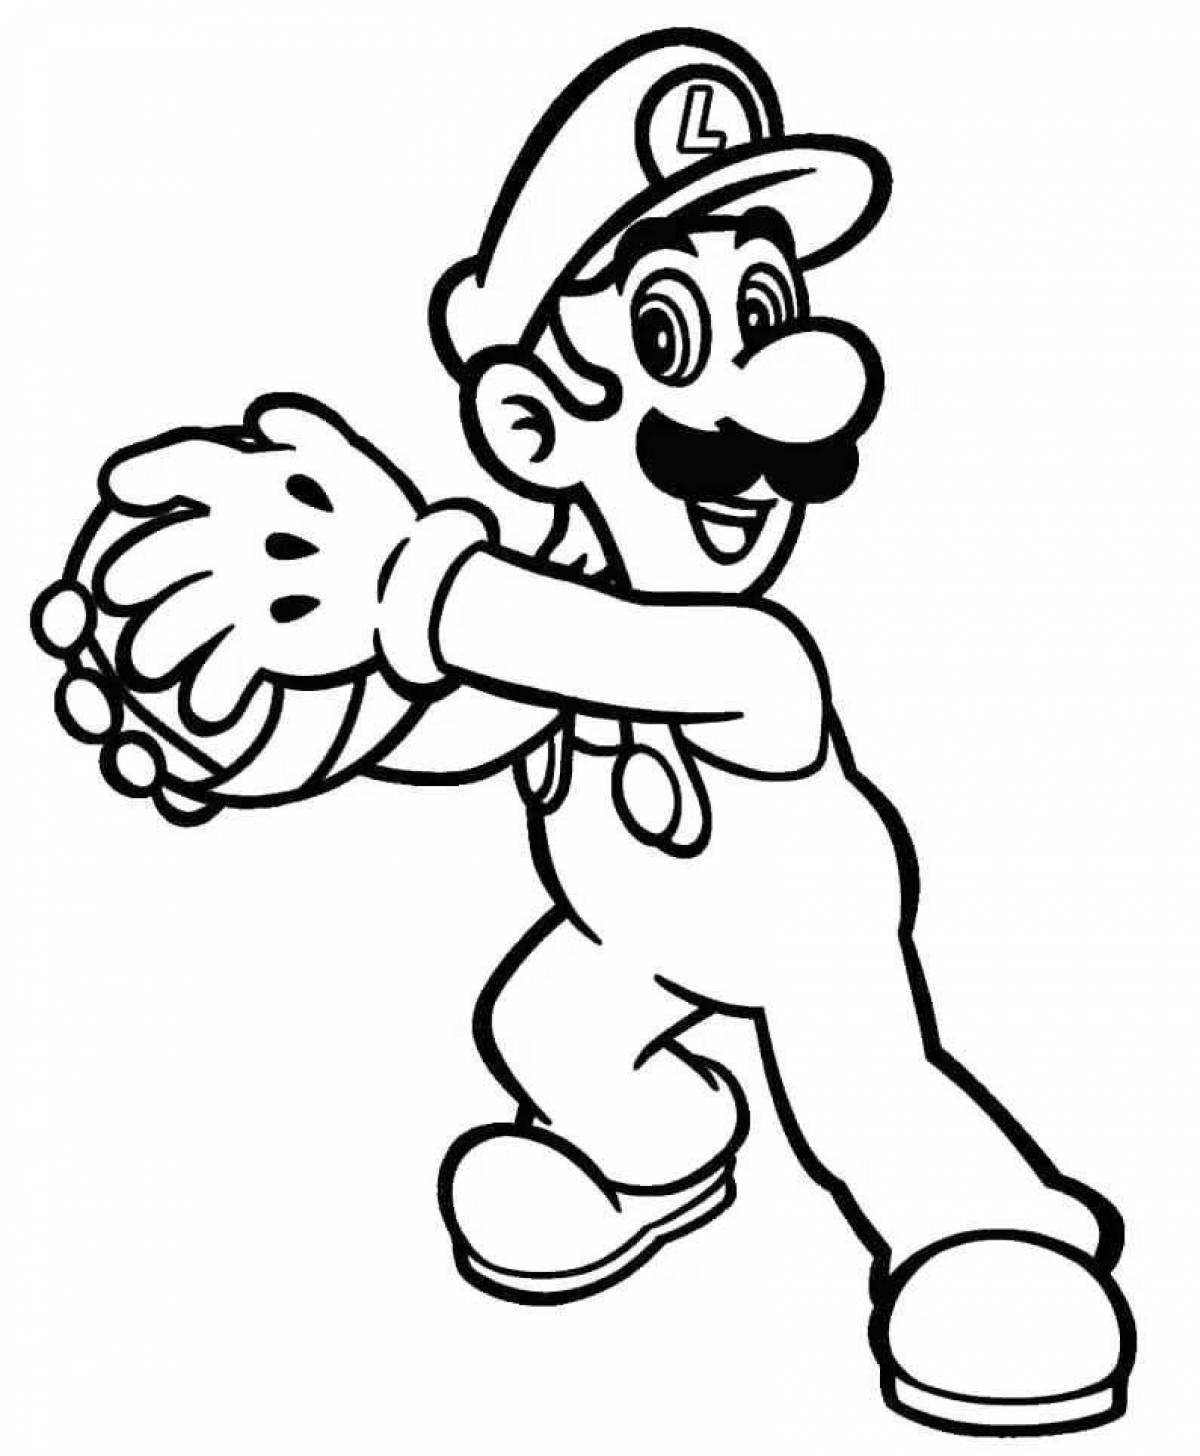 Mario for kids #8